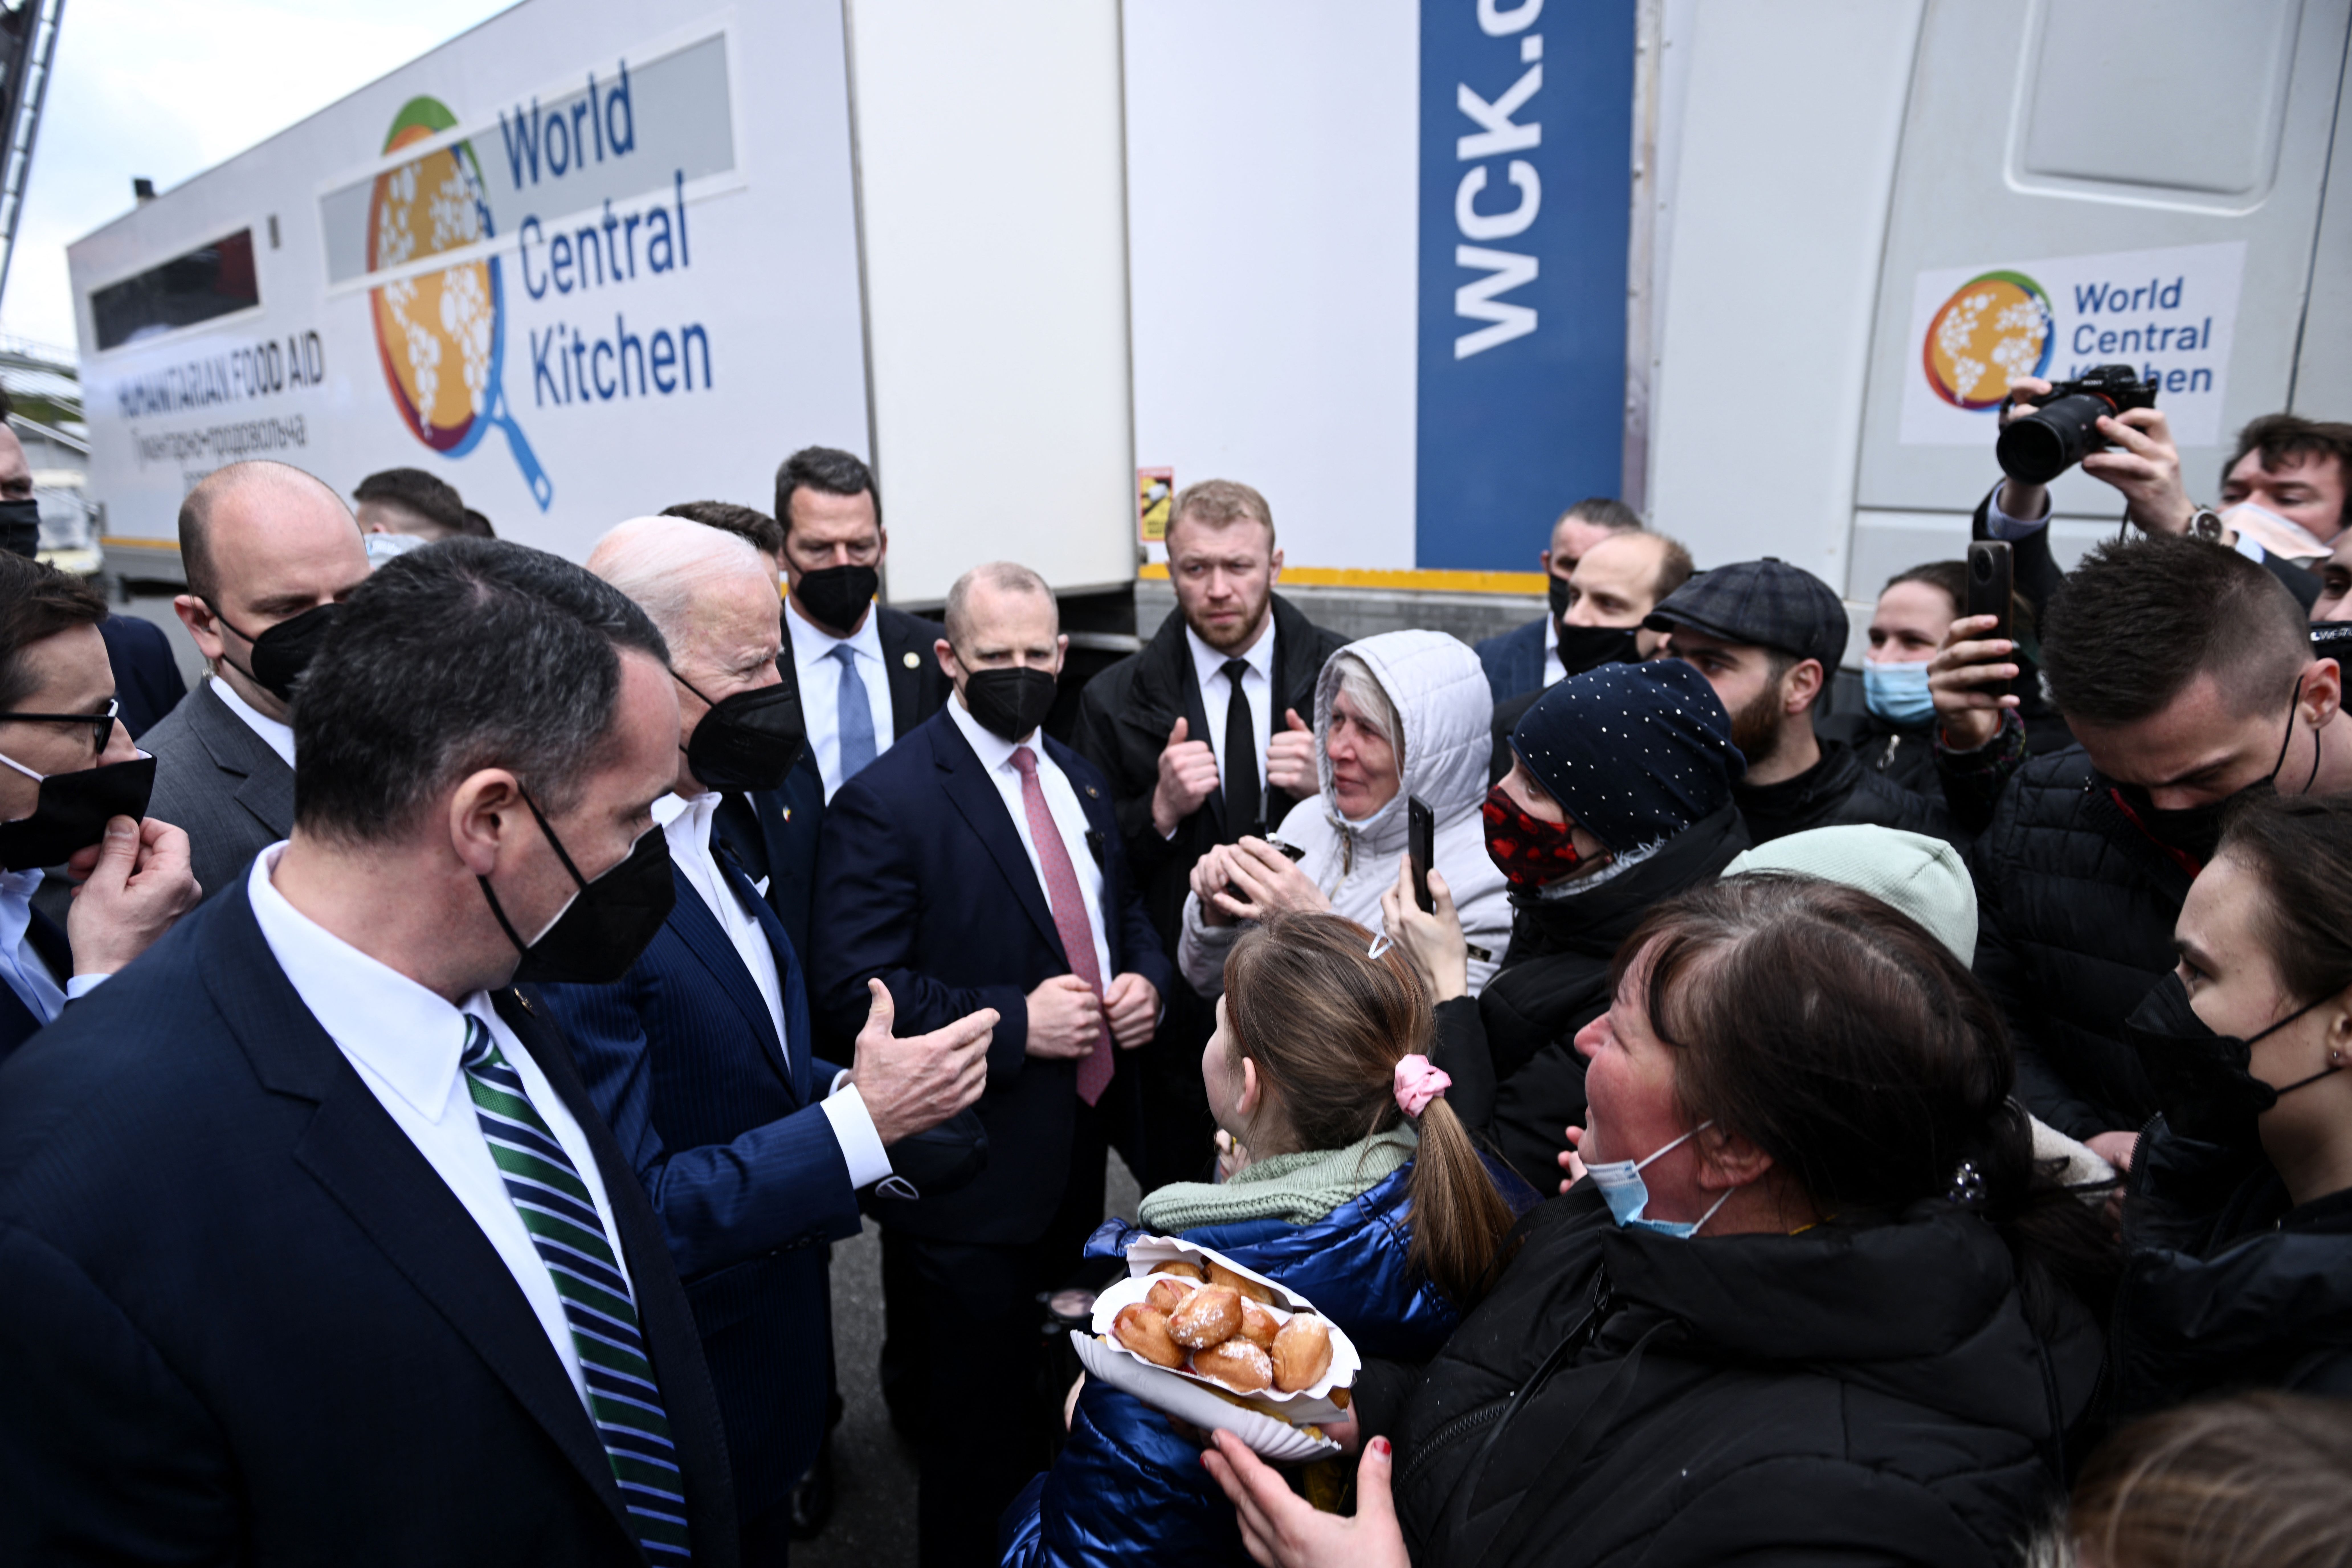 President Joe Biden (C) meets with Ukrainian refugees at PGE Narodowy Stadium in Warsaw on March 26, 2022